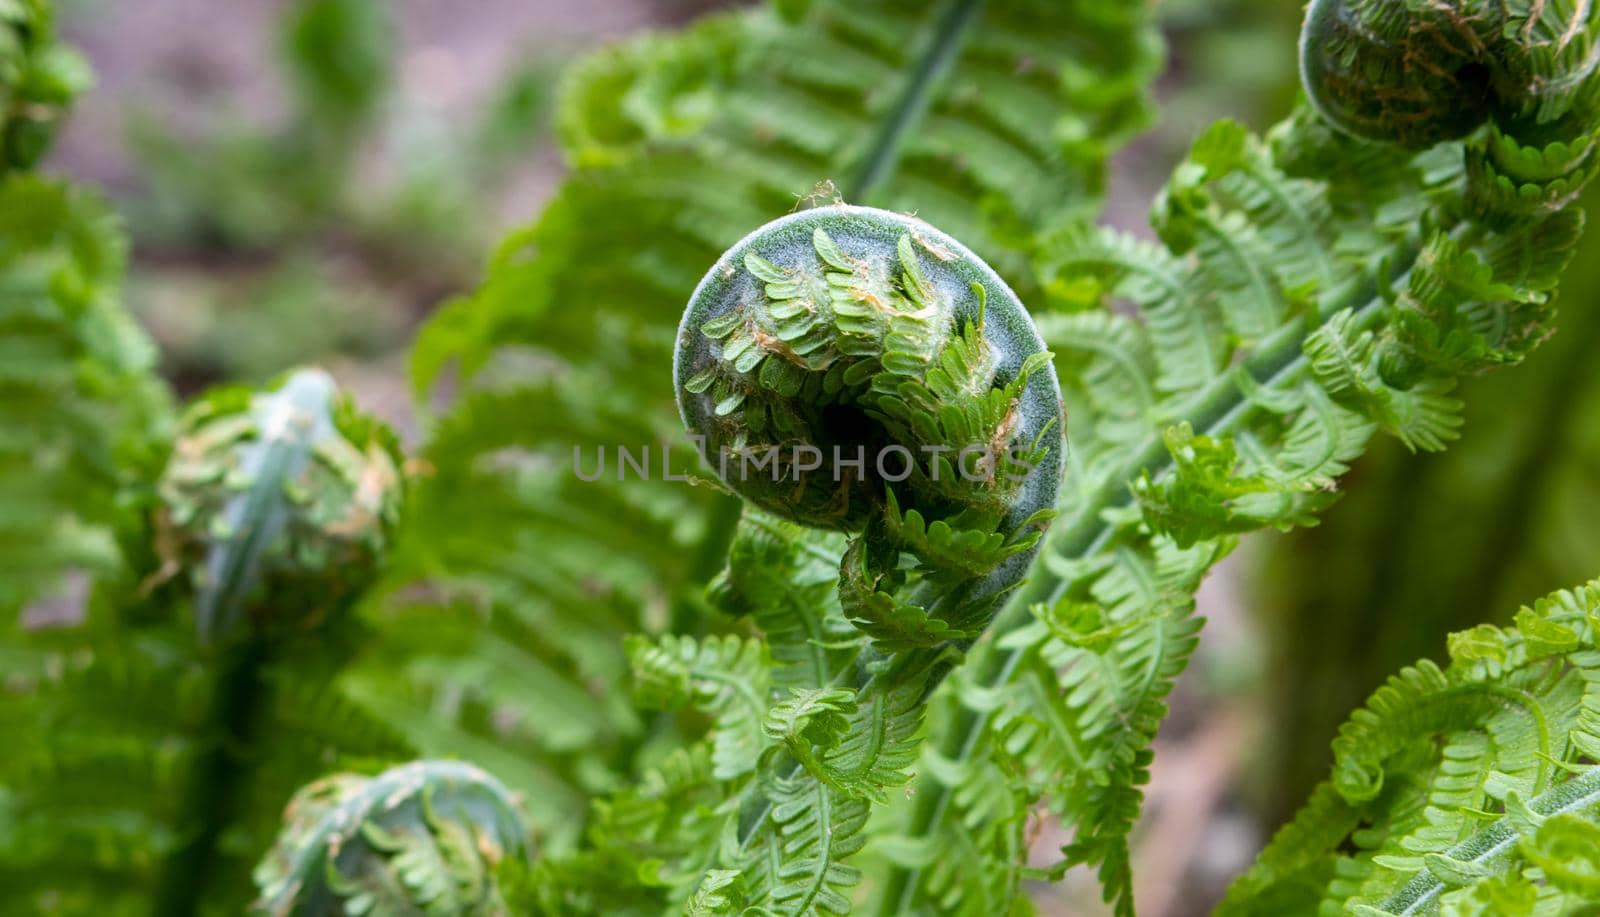 Fern Spiral of Matteuccia is a genus of ferns with one species: Matteuccia struthiopteris common names ostrich fern, fiddlehead fern, or shuttlecock fern.